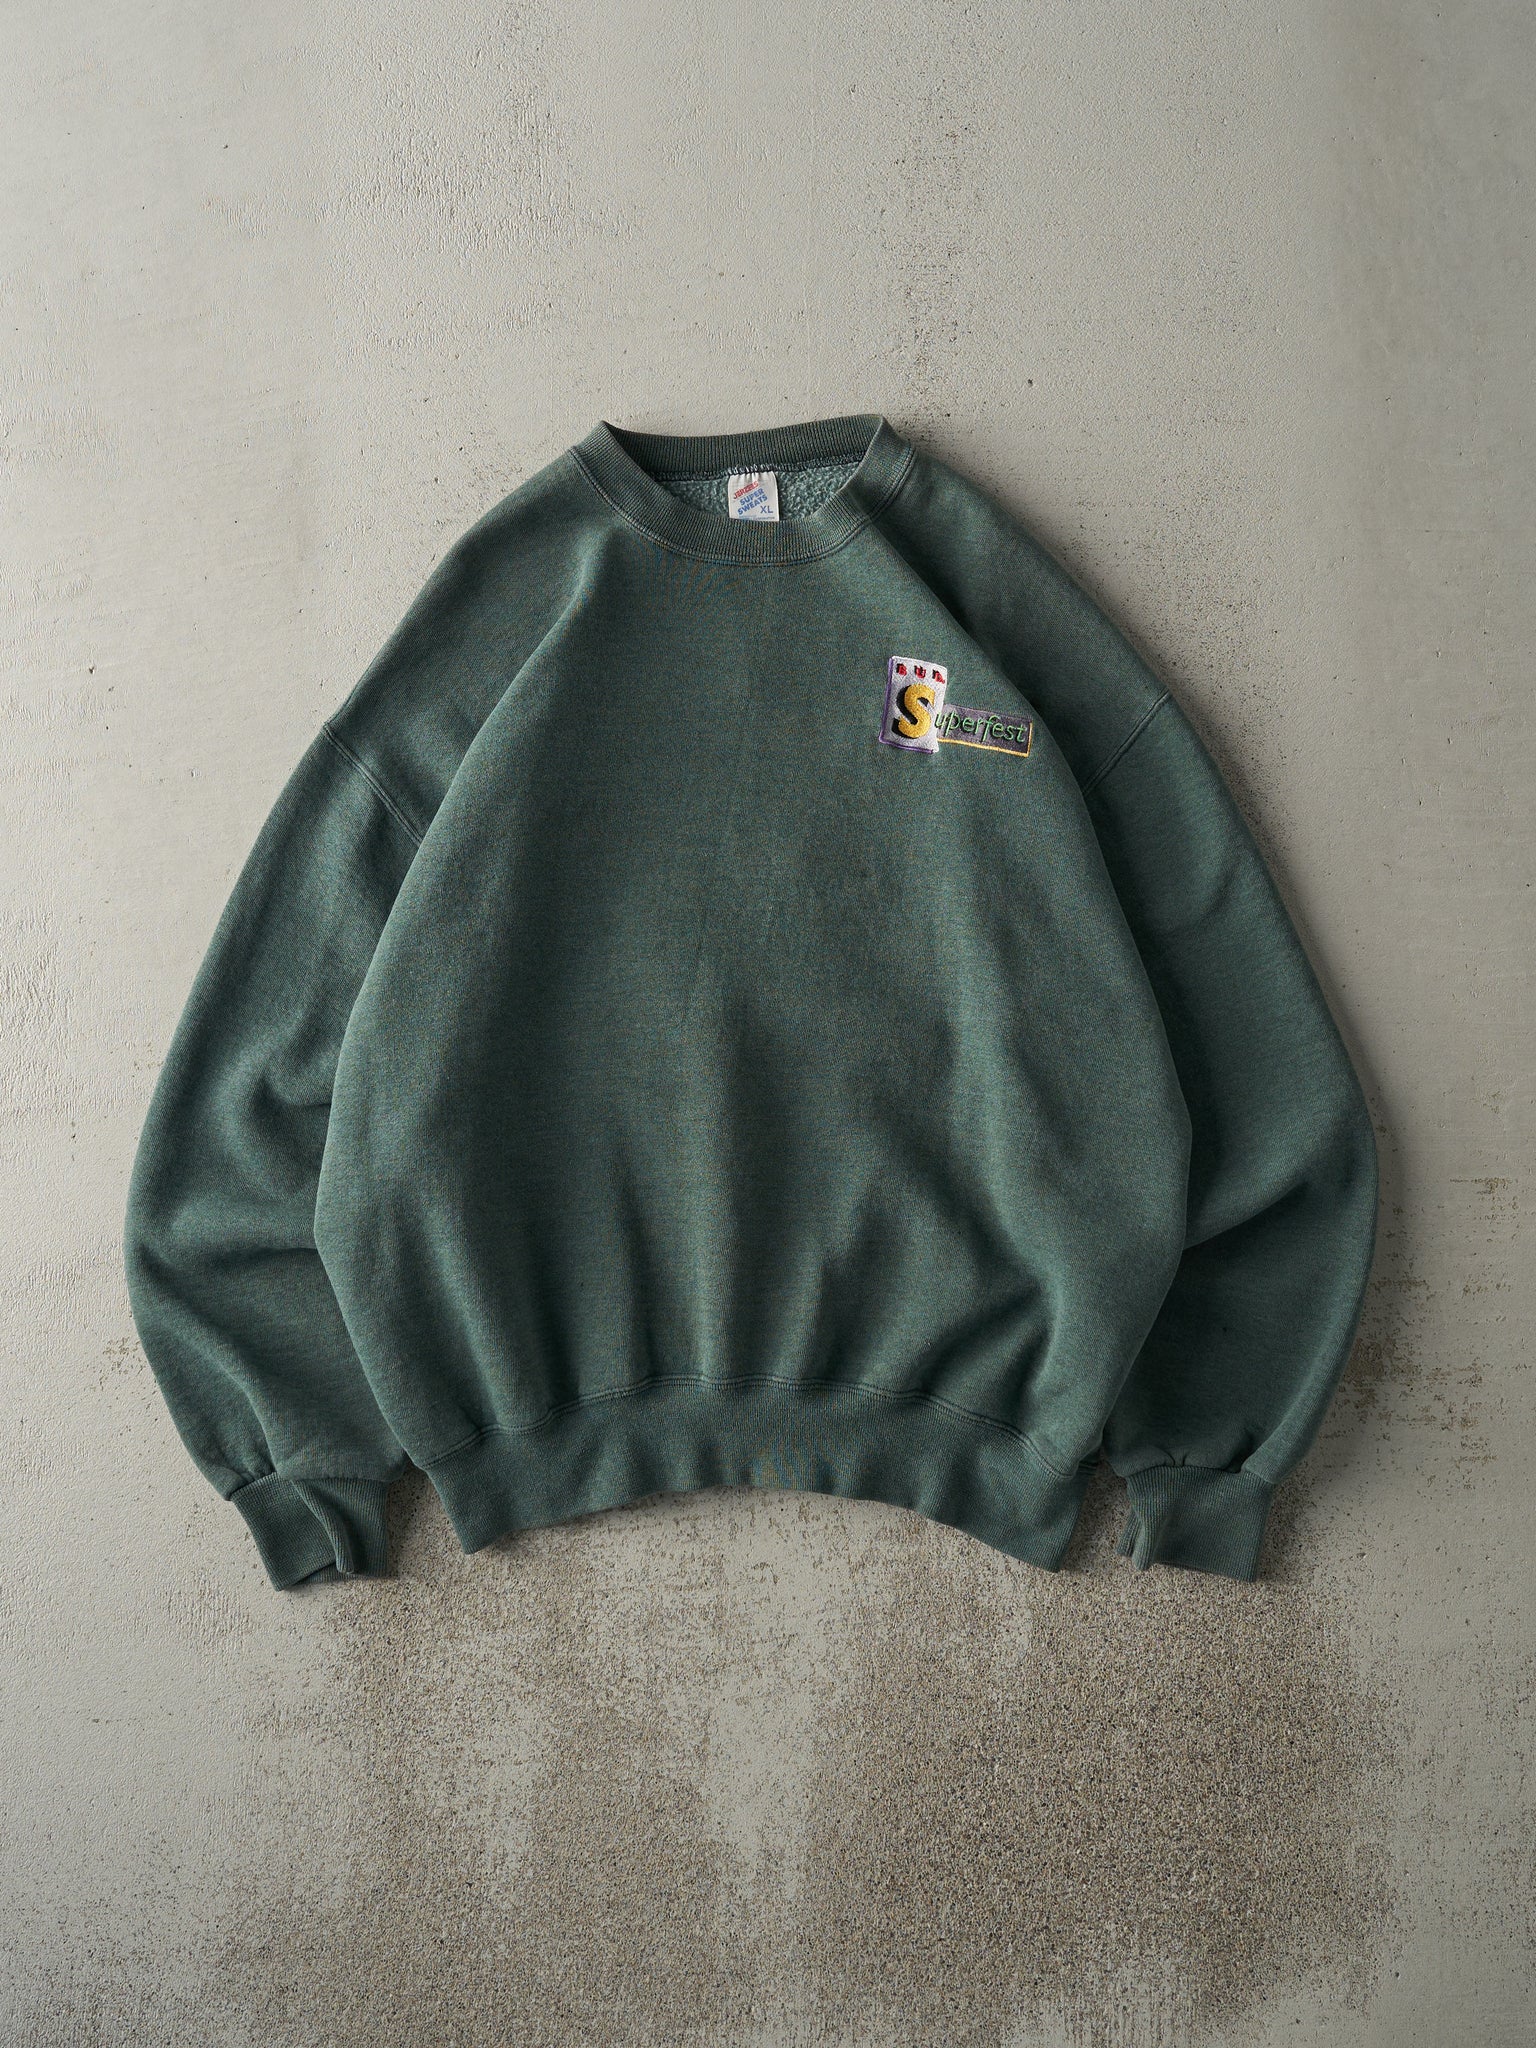 Vintage 80s Green Embroidered Budweiser x New Edition Crewneck (L)